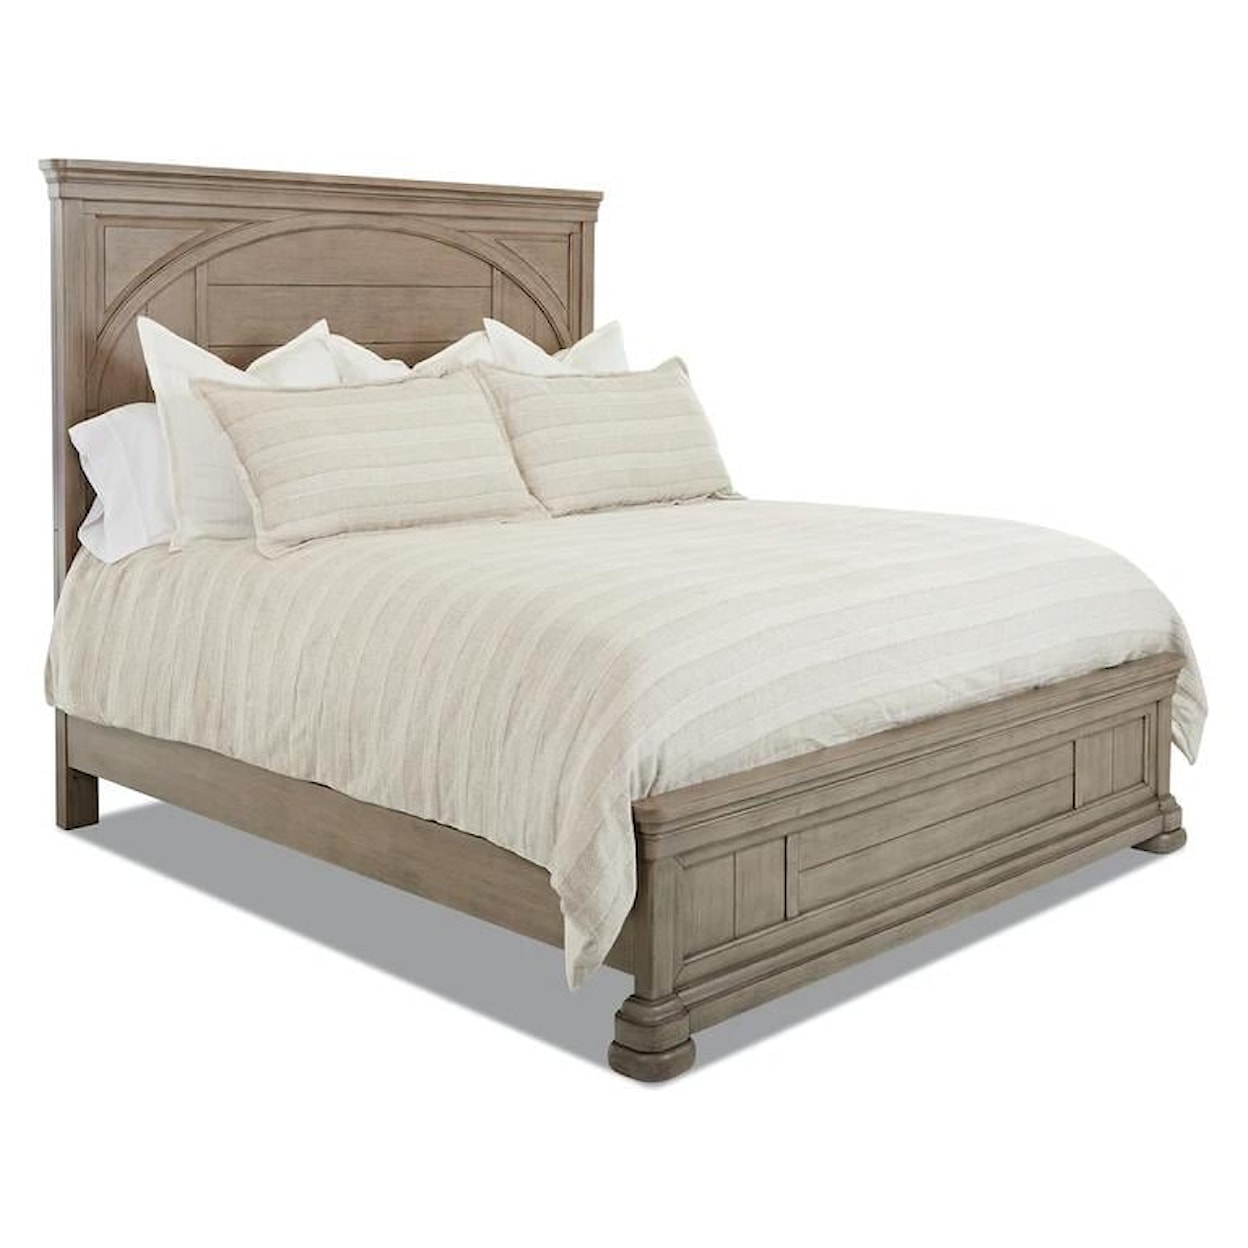 Trisha Yearwood Home Collection by Legacy Classic Nashville Panel Bed, Queen